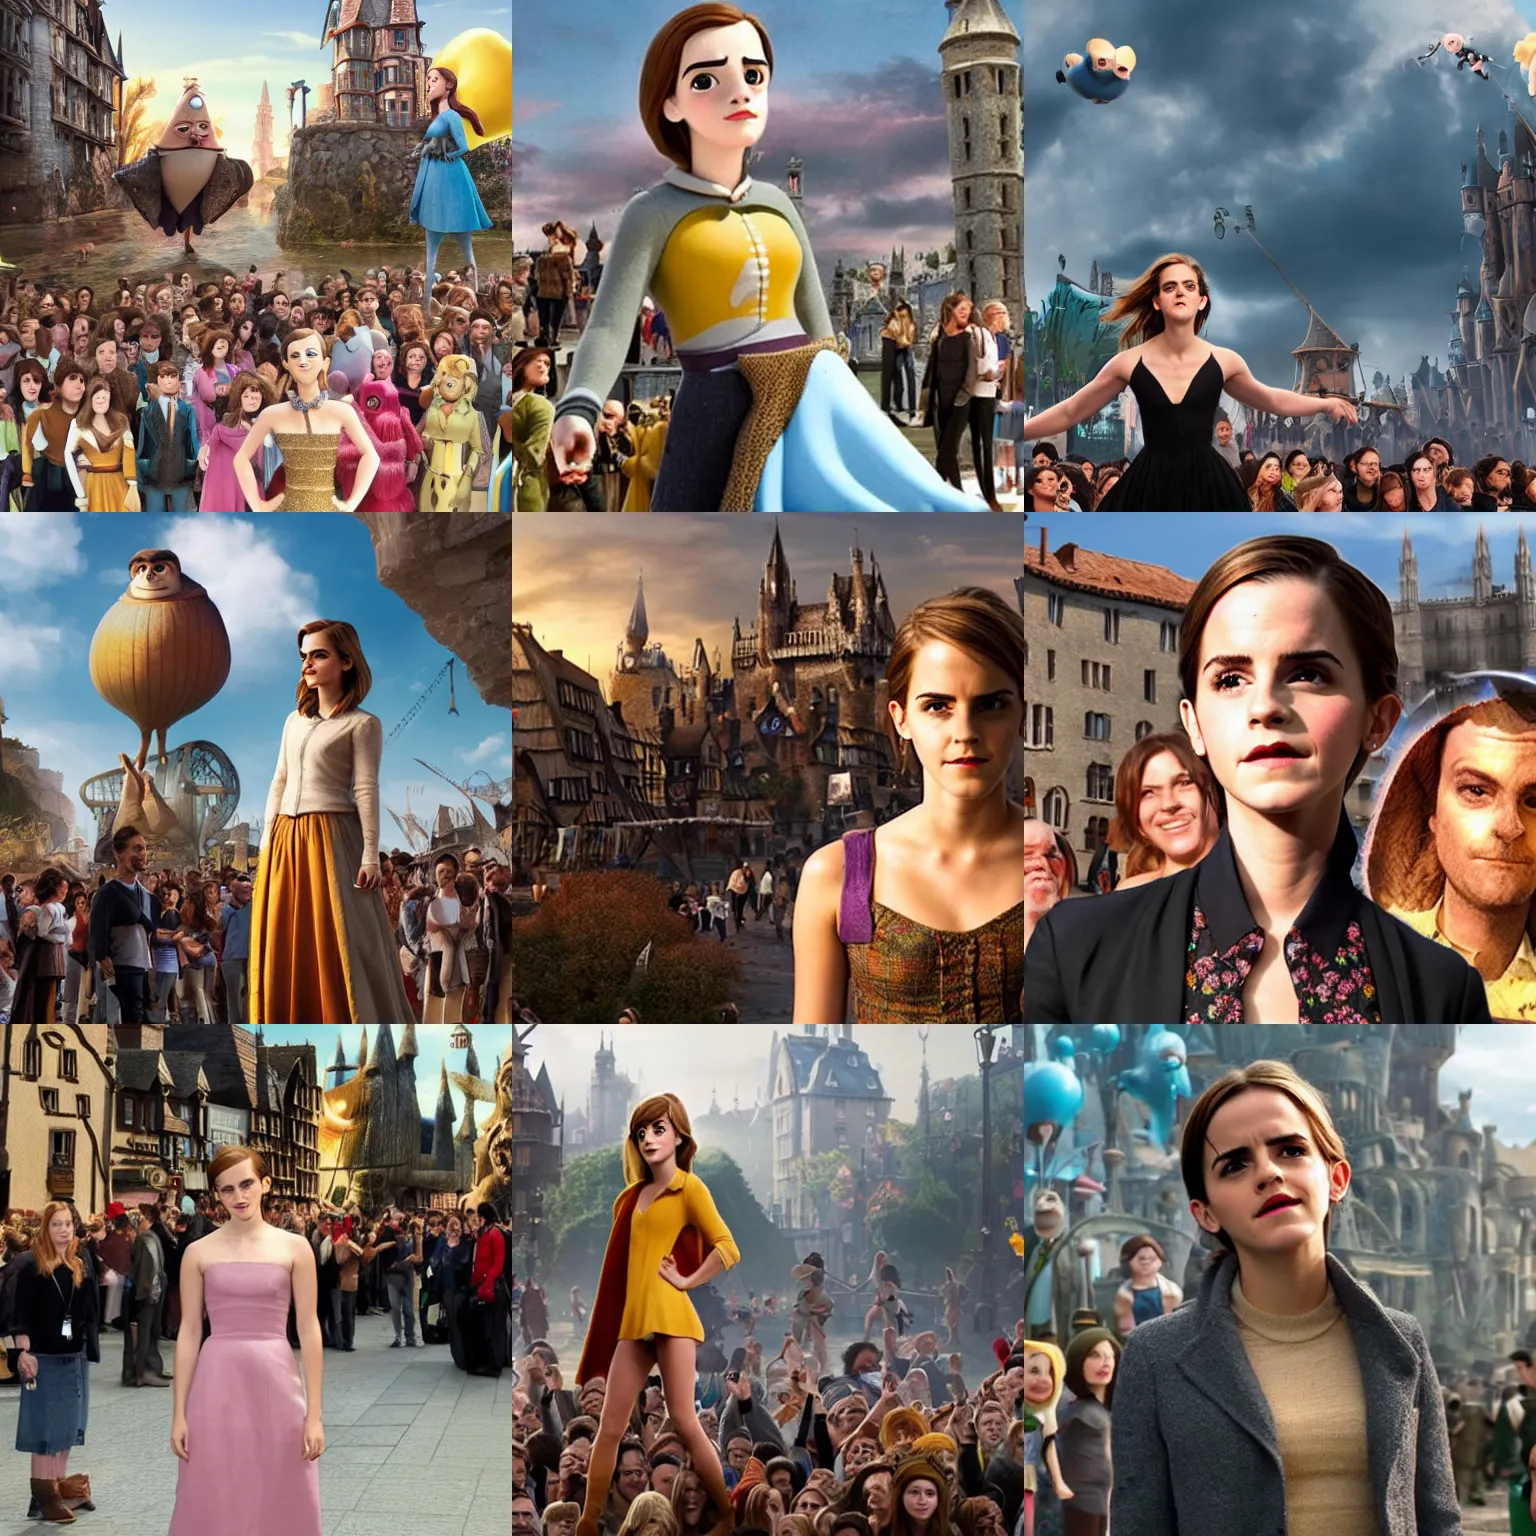 Prompt: Giant Emma Watson stands next to a town, surrounded by people, Pixar animation, Gulliver's Travels